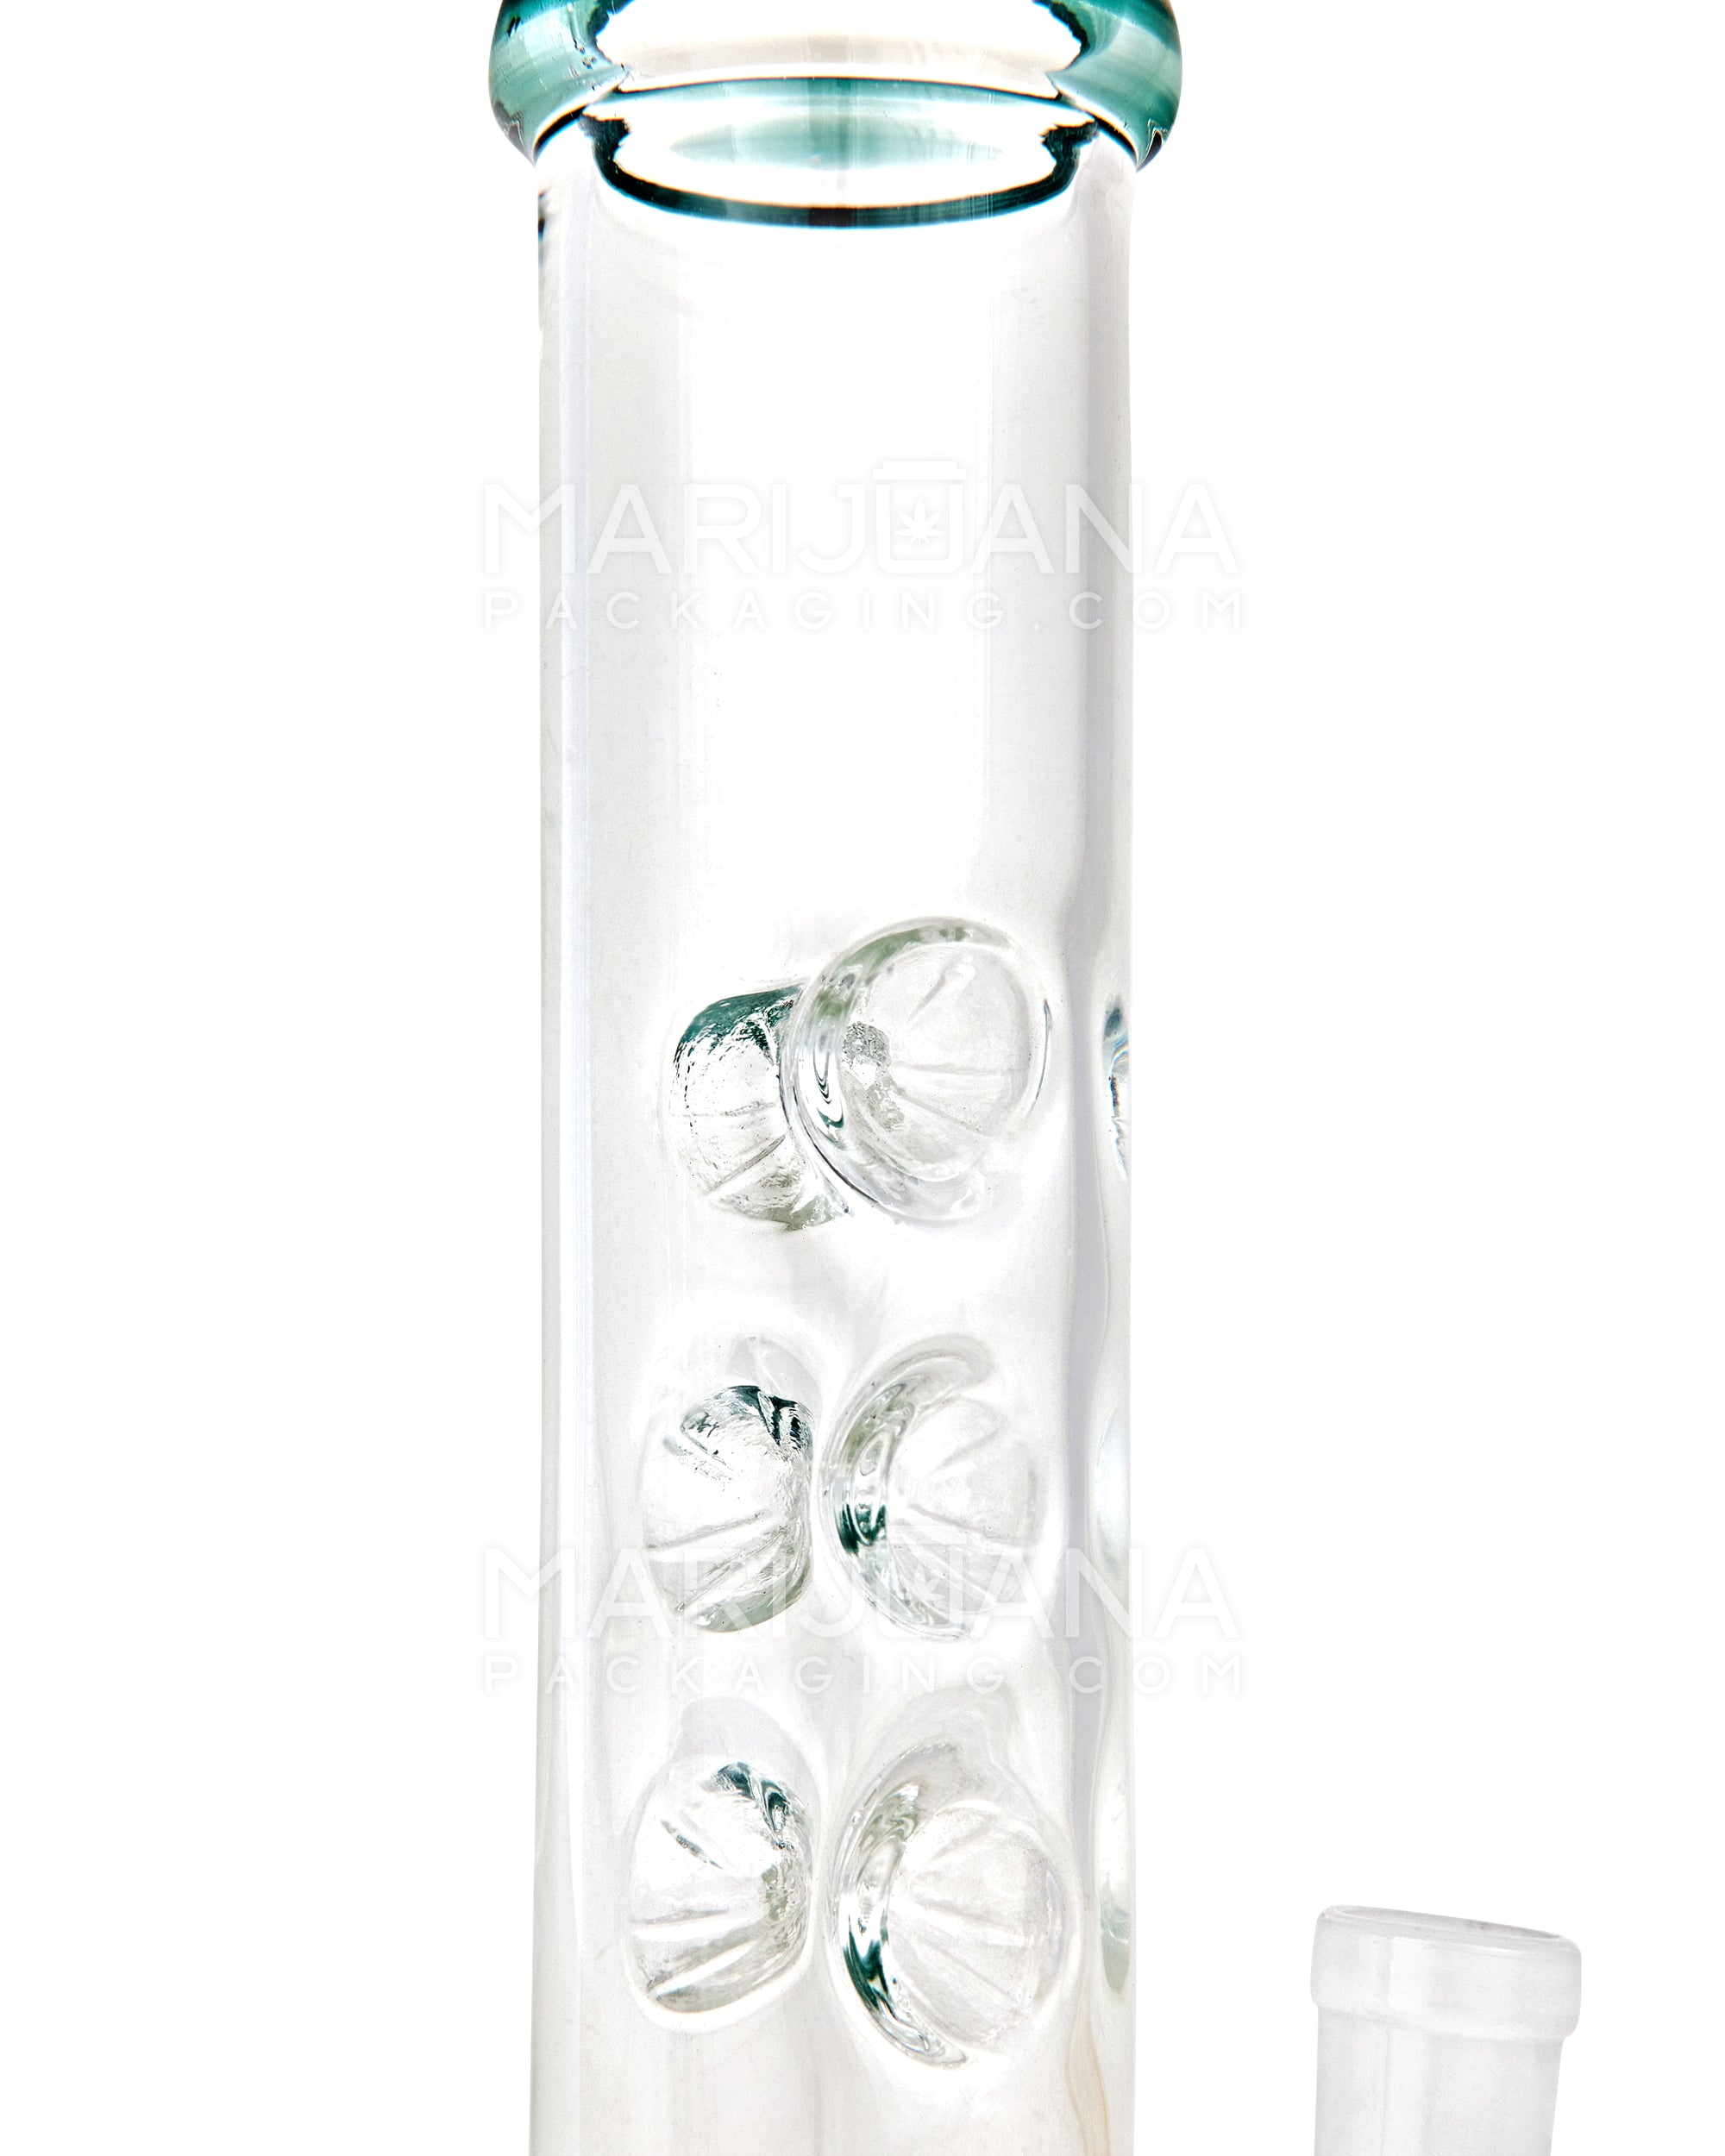 Straight Neck Atomic Perc Glass Beaker Water Pipe w/ Ice Catcher | 10in Tall - 14mm Bowl - Teal - 3